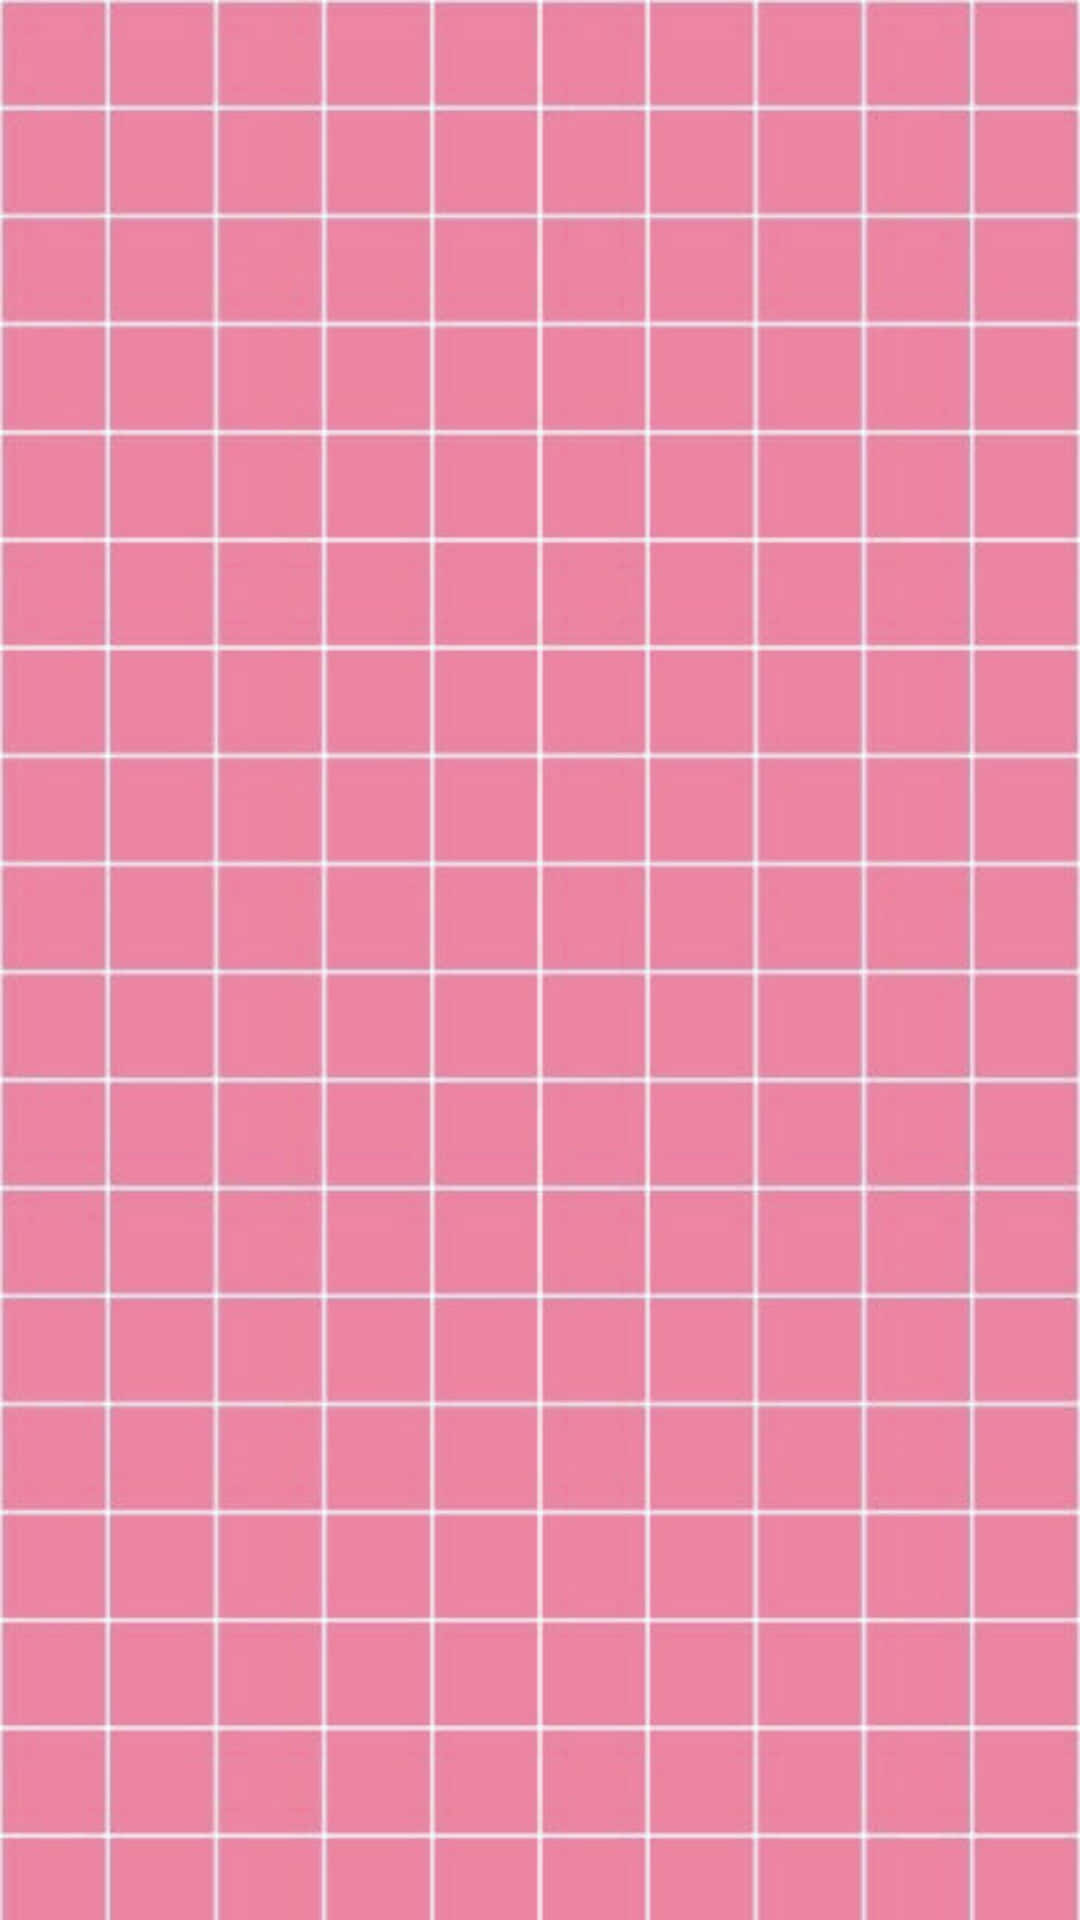 Vibrant and Colorful Pastel Aesthetic Grid Wallpaper